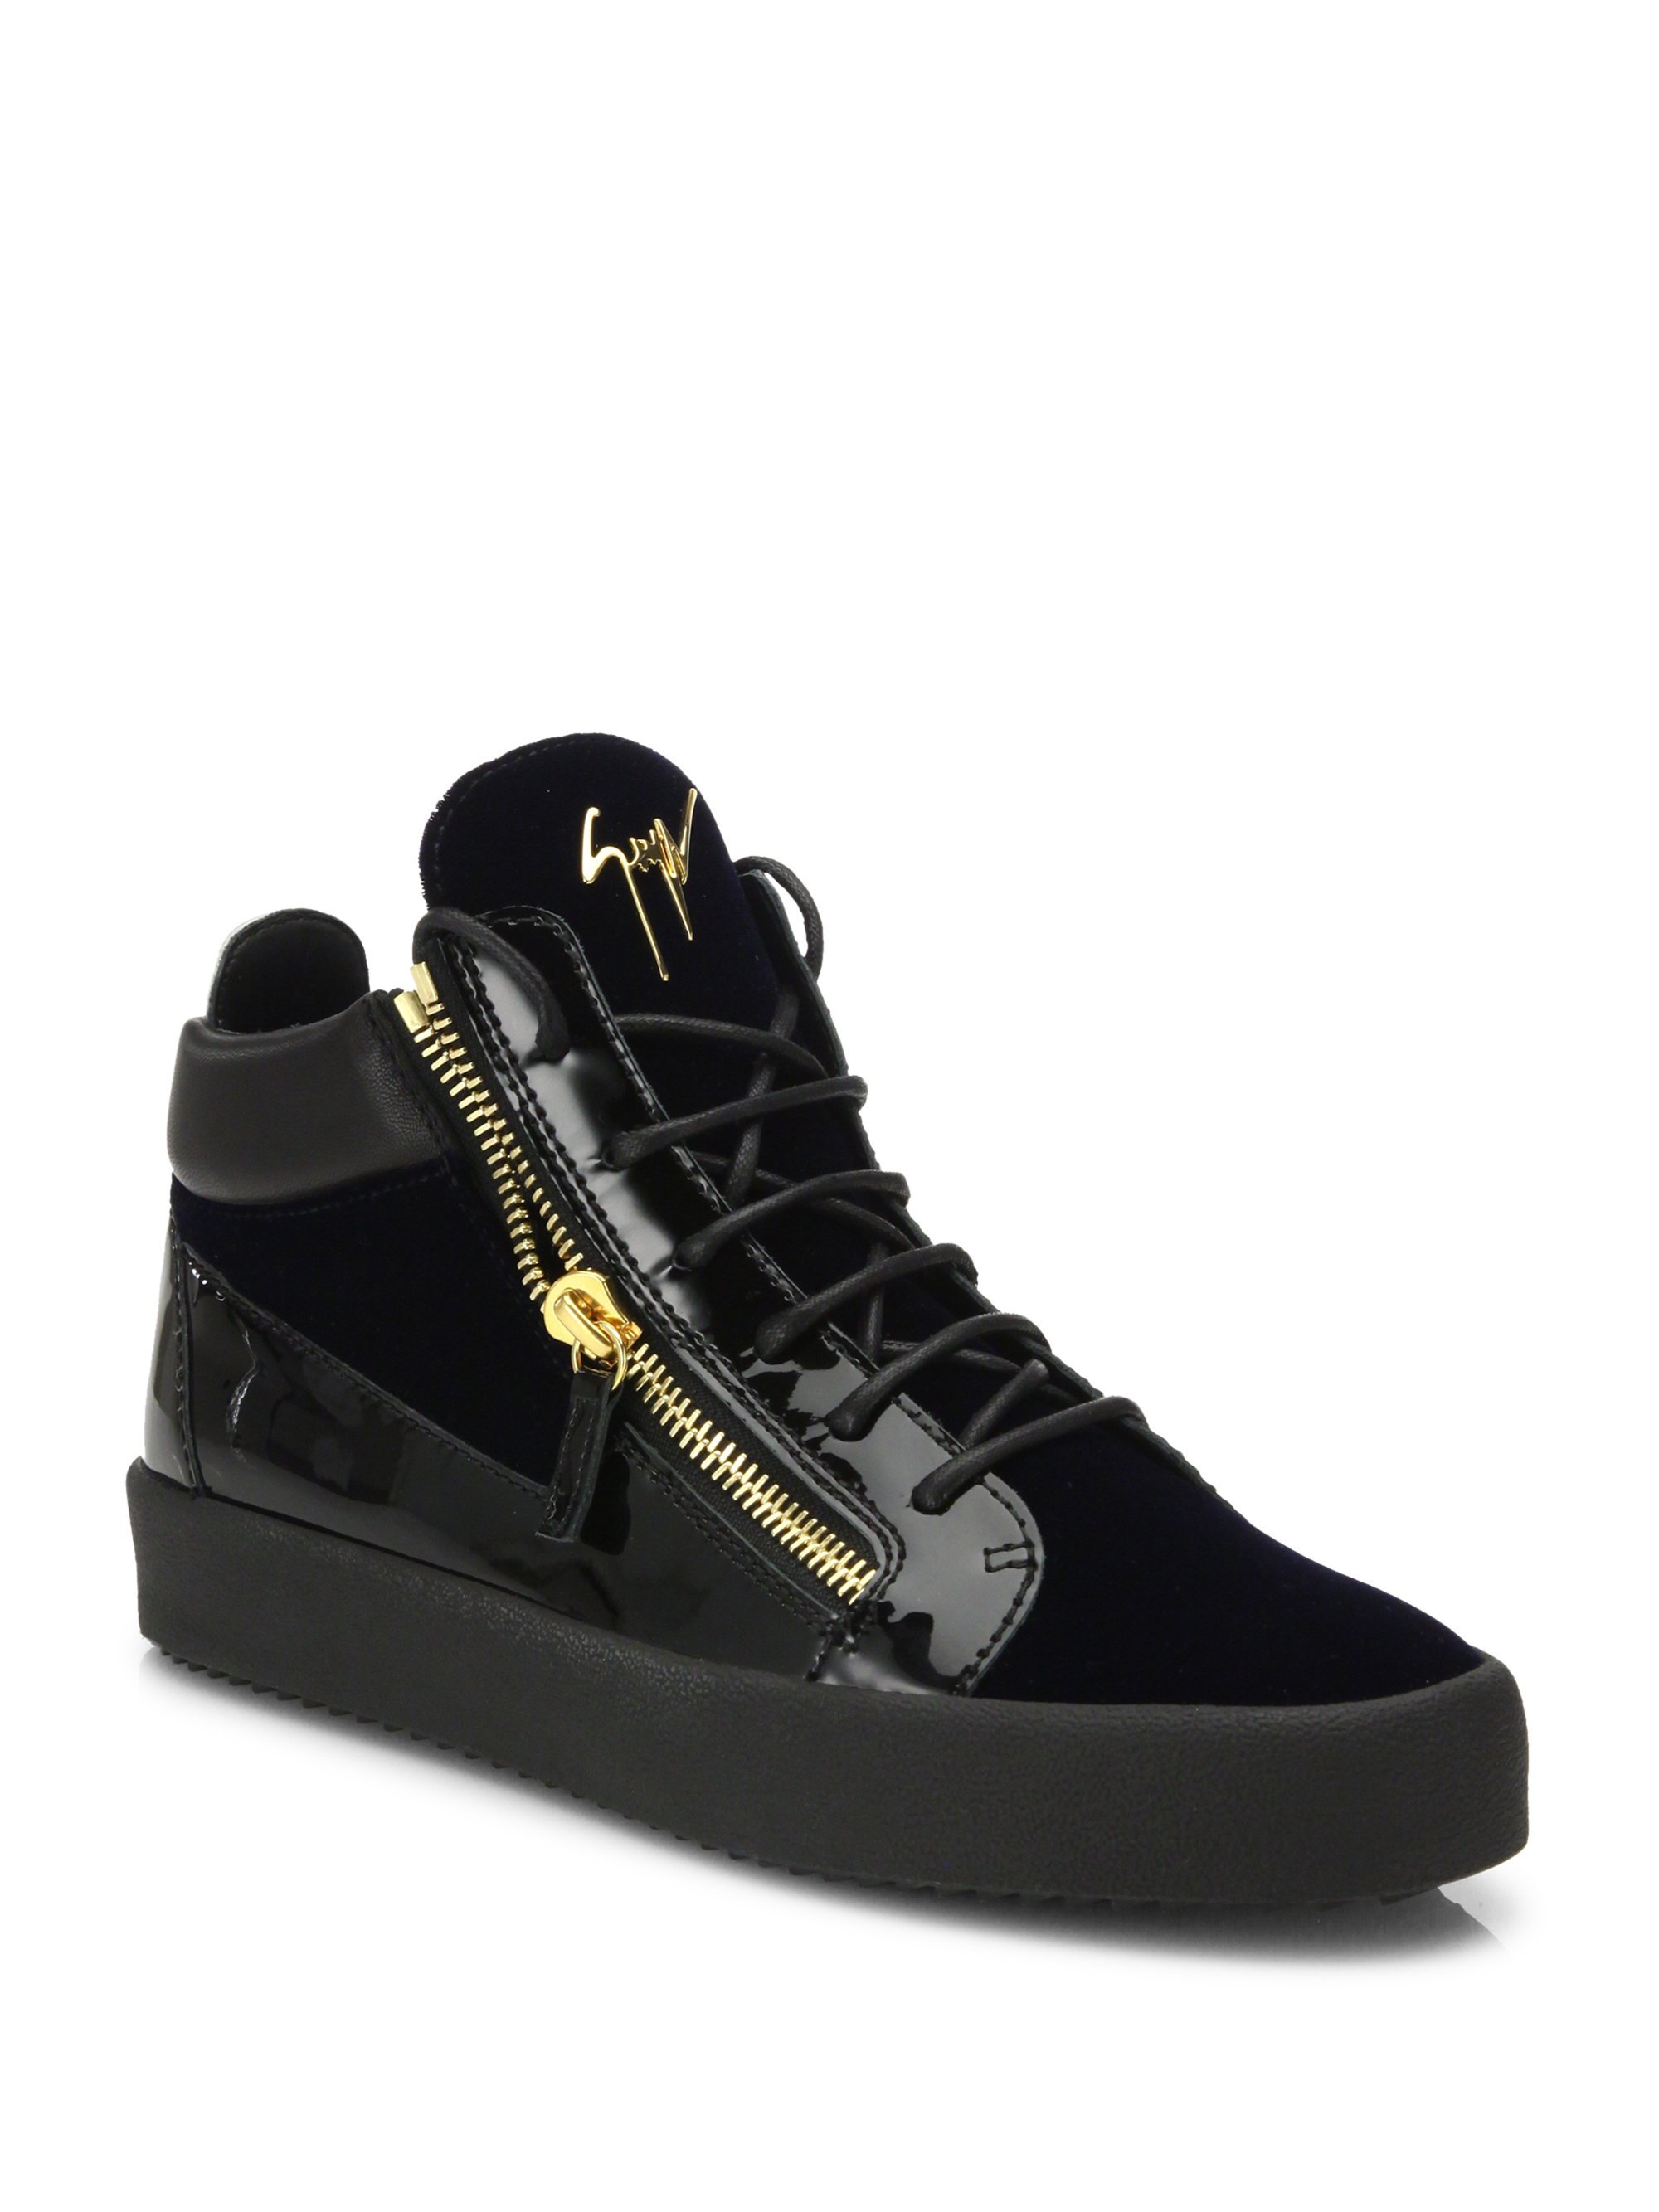 Lyst - Giuseppe Zanotti Patent Leather Sneakers in Blue for Men